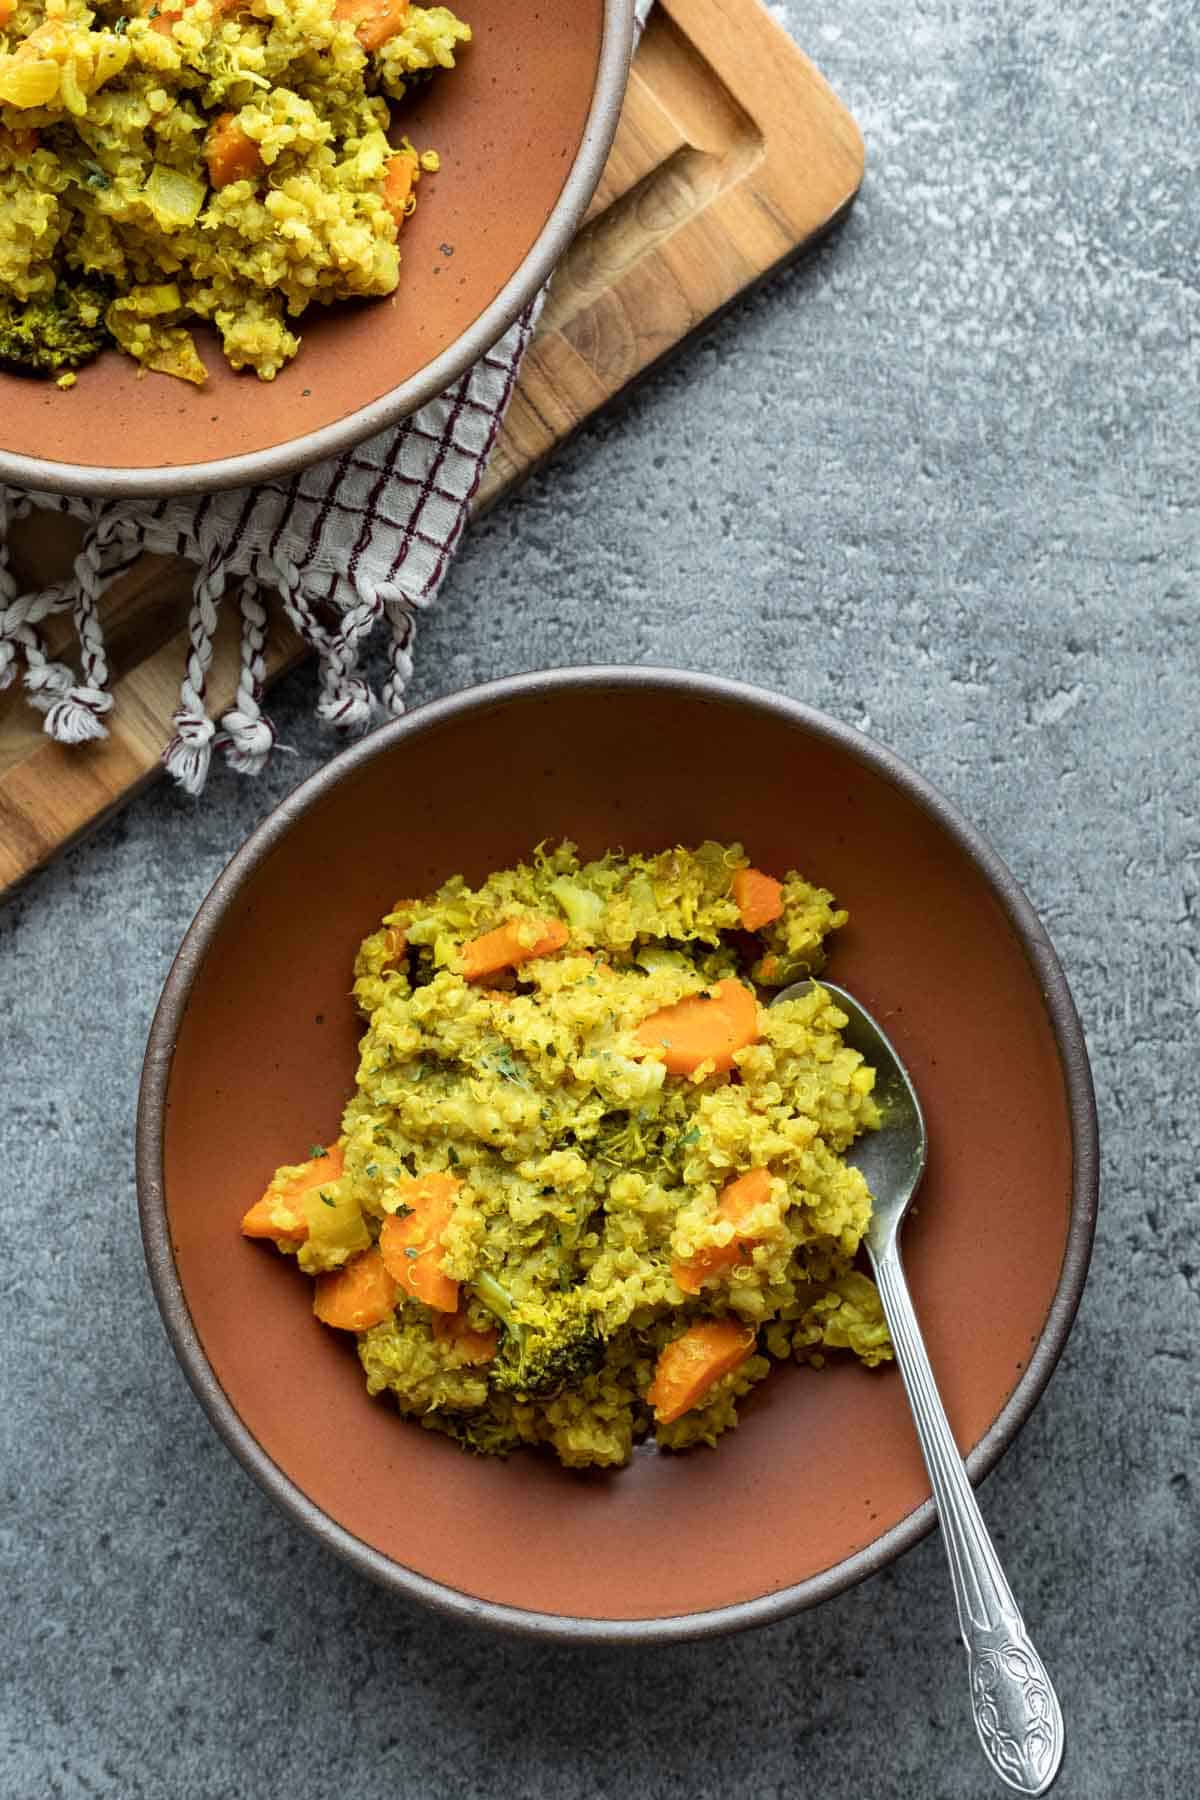 Two bowls filled with golden quinoa kitchari against a blue-gray background.